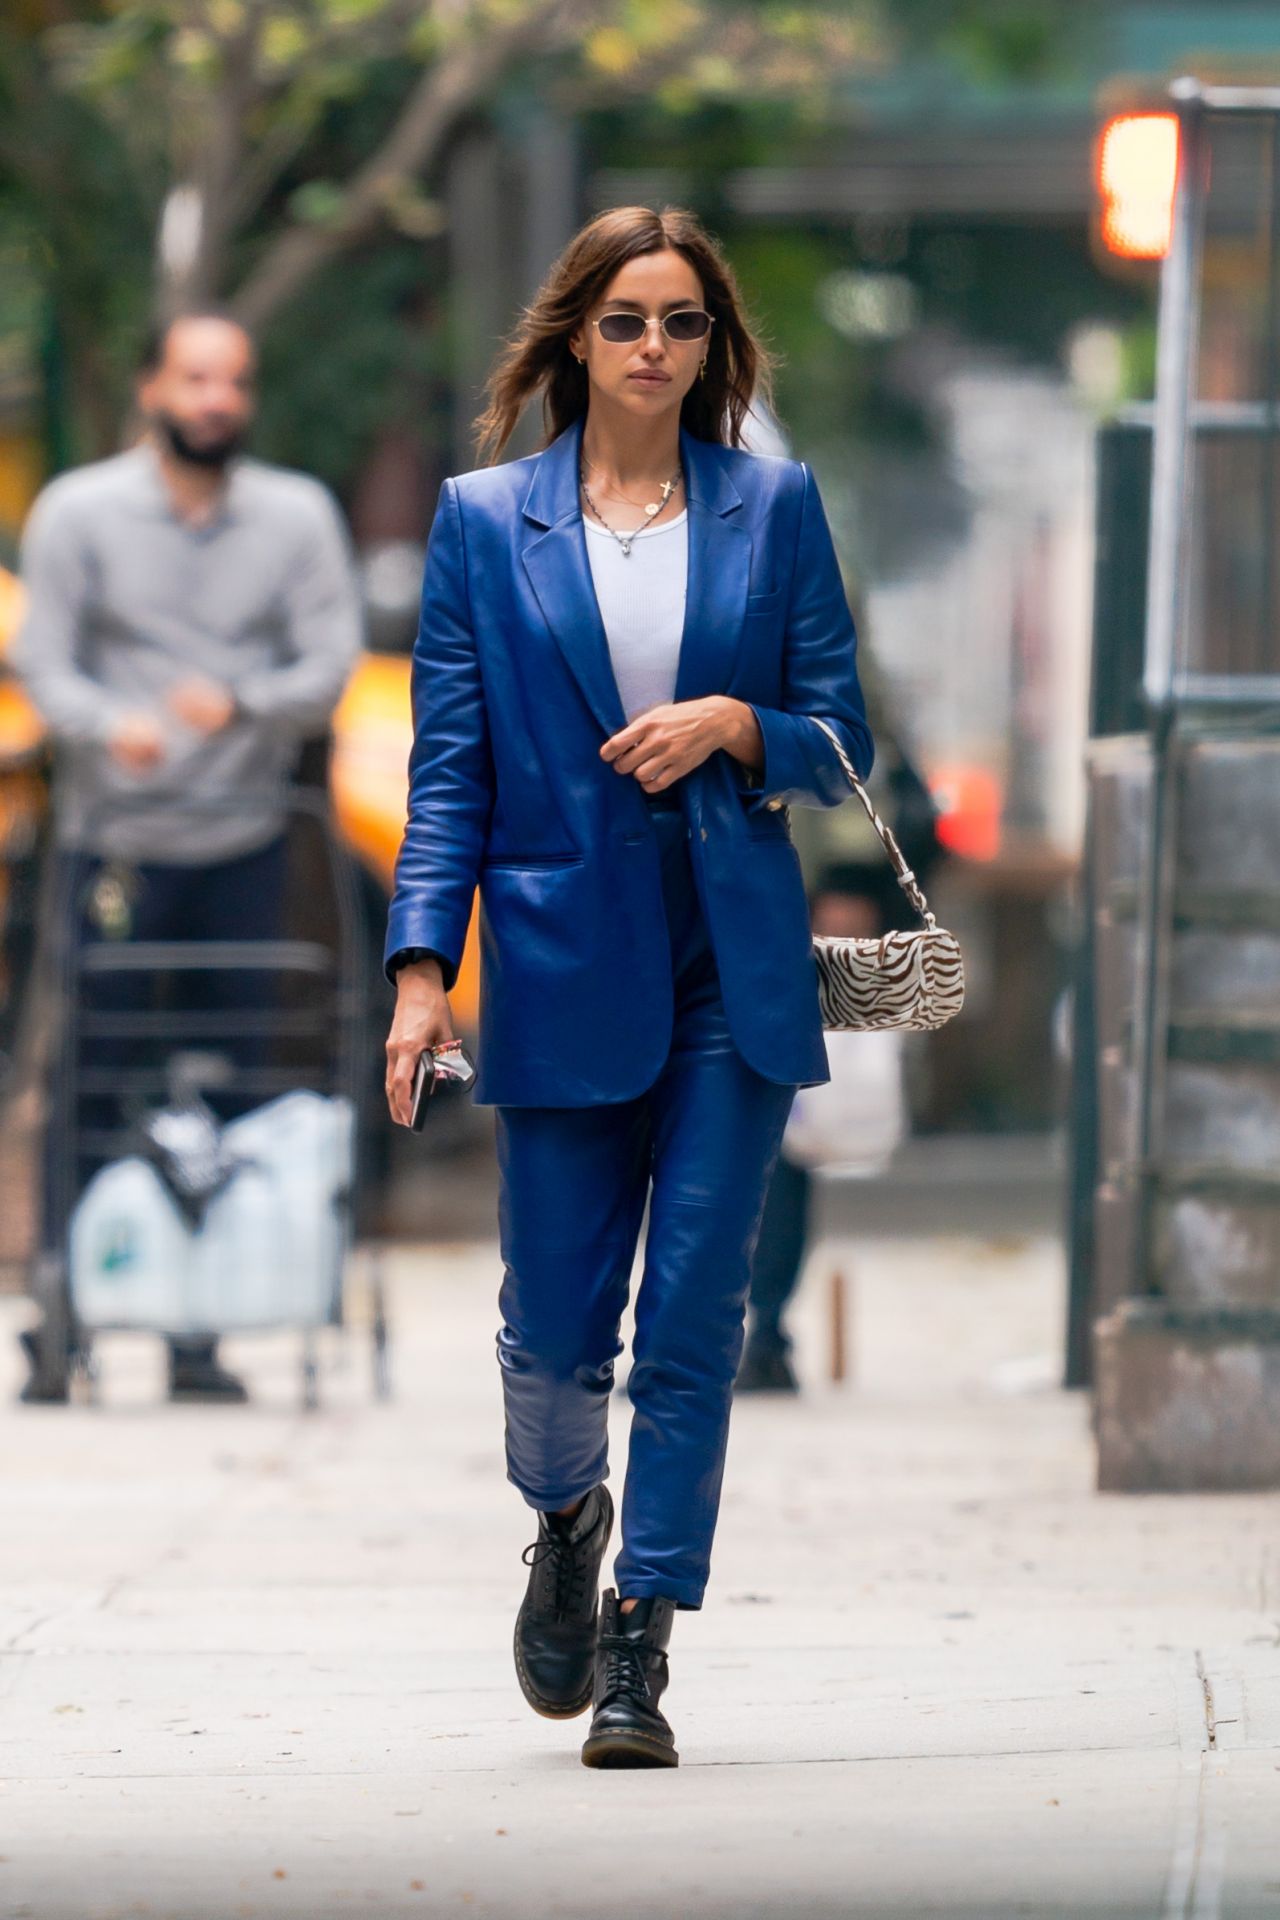 irina-shayk-in-a-blue-leather-suit-and-sheer-white-top-nyc-10-23-2020-9.jpg